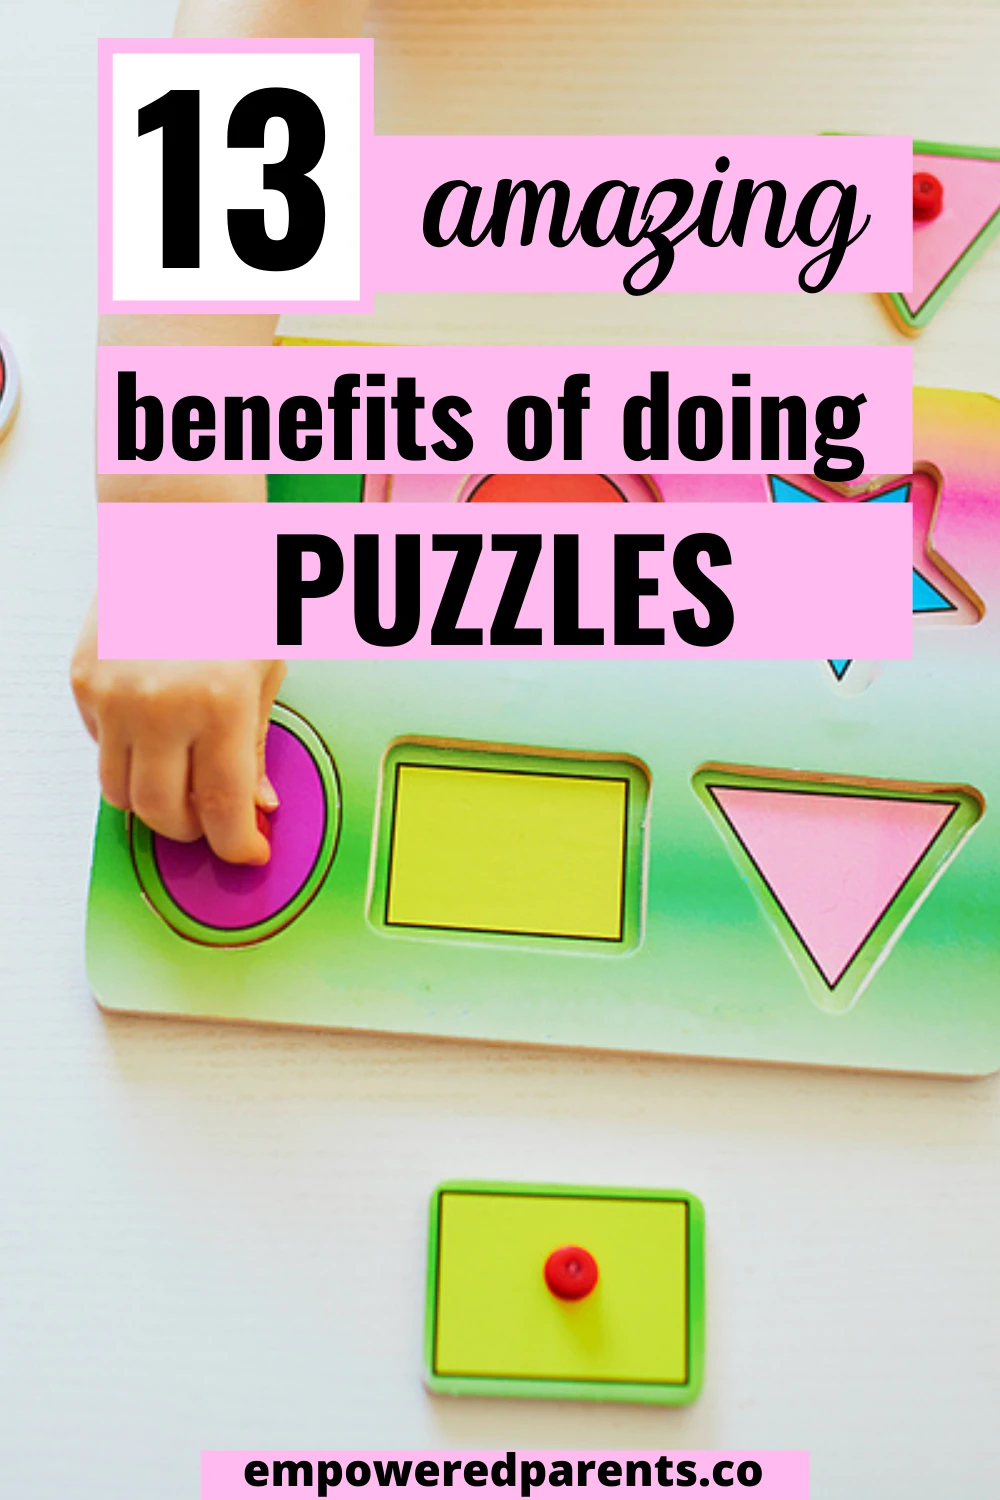 Shape peg puzzle with text overlay "13 amazing benefits of doing puzzles".